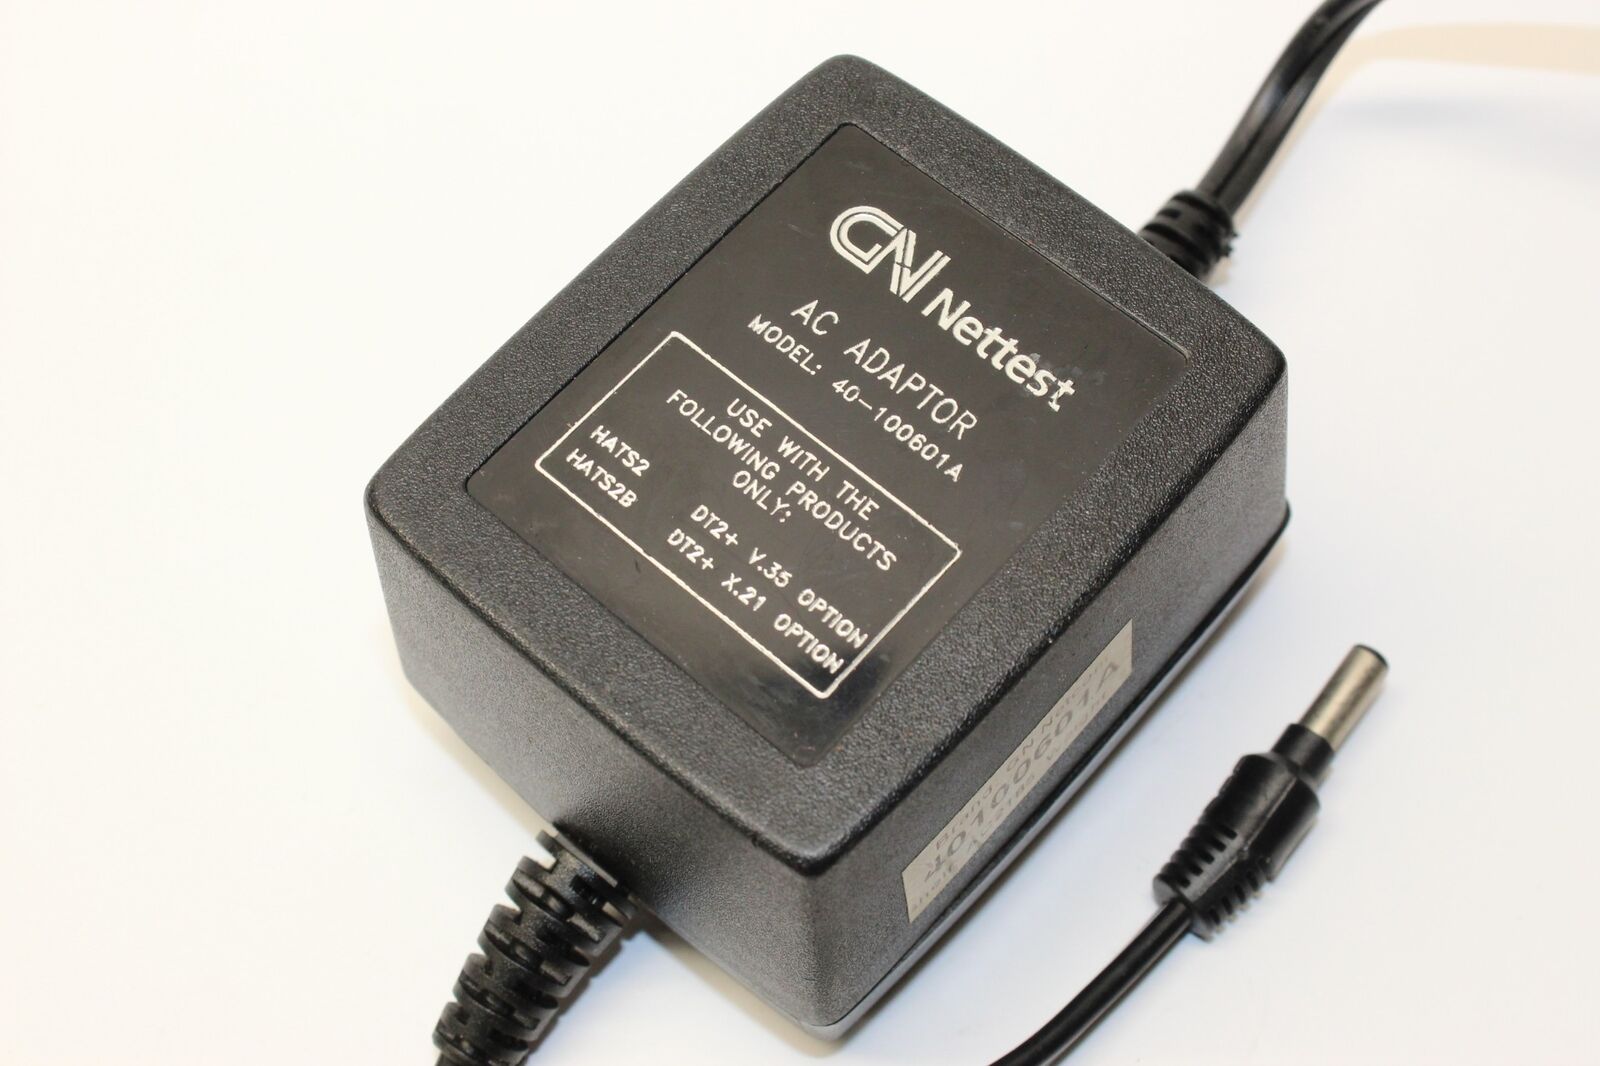 Genuine GN Nettest 40-100601A Power Supply AC Adapter Output DC 9.5V 1.5A Brand: GN Nettest Type: Adapter MPN: Do